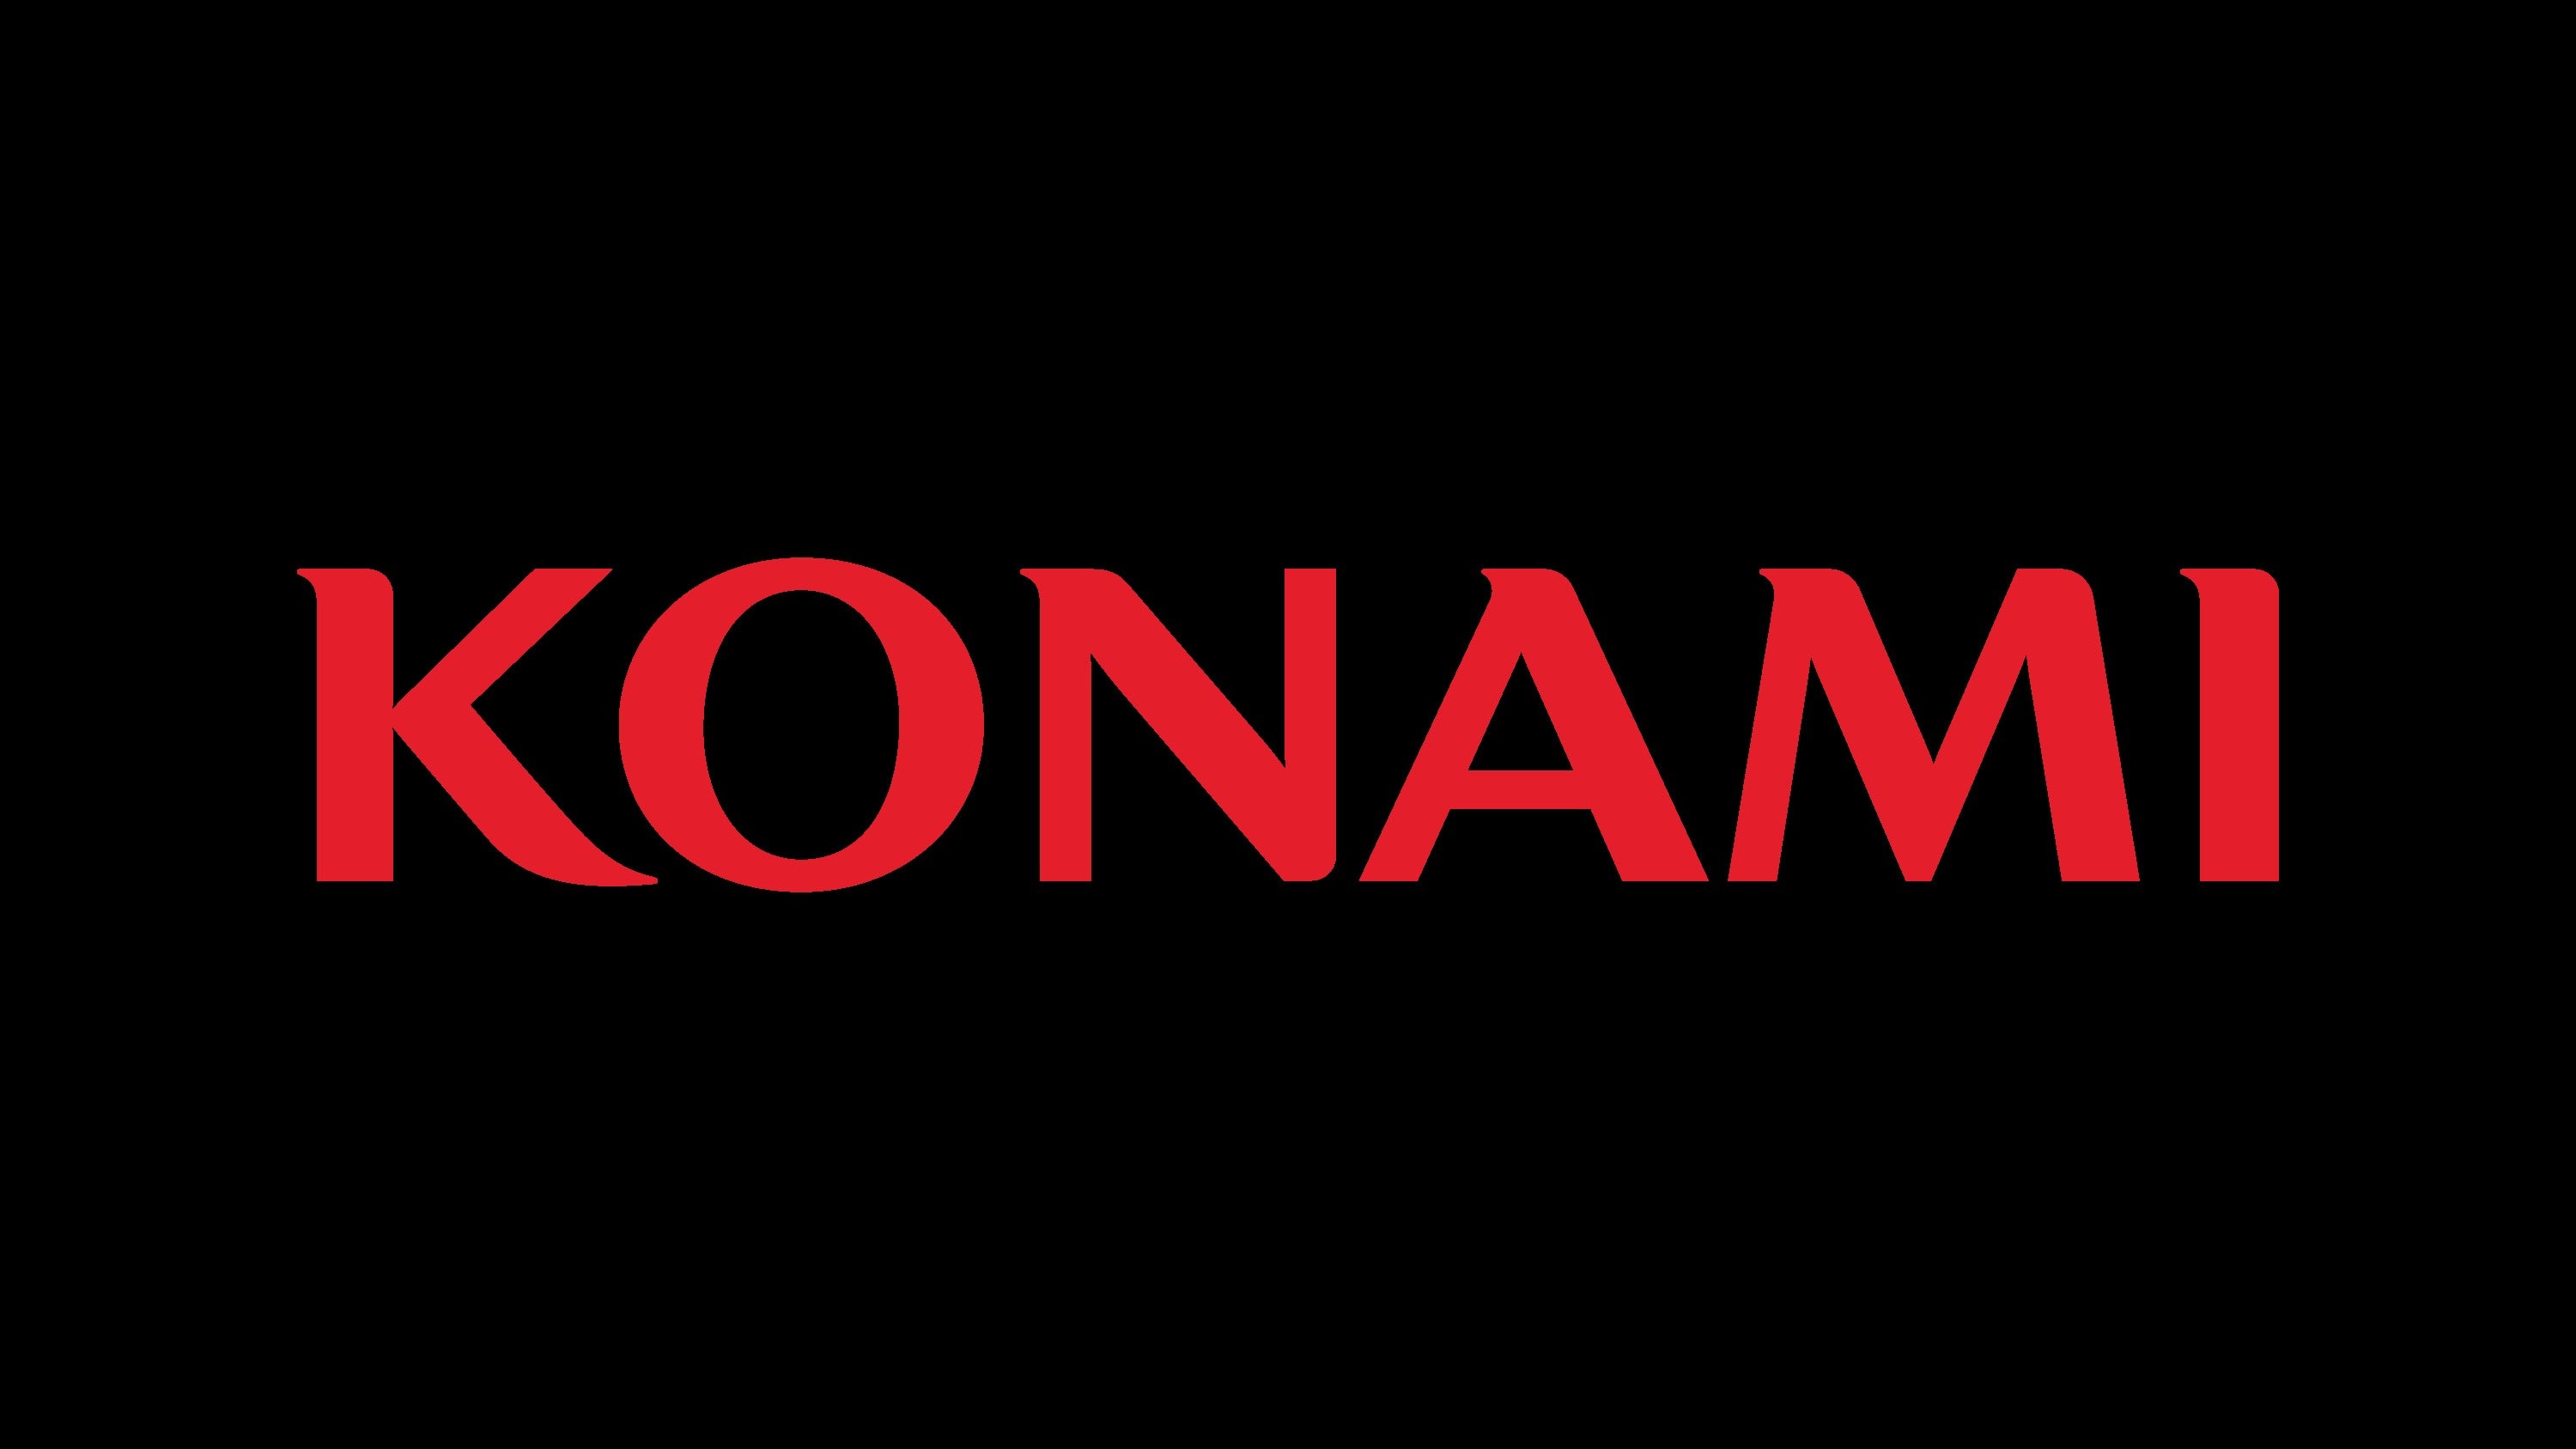 Gaming giant Konami launches several initiatives in Web3 and Metaverse